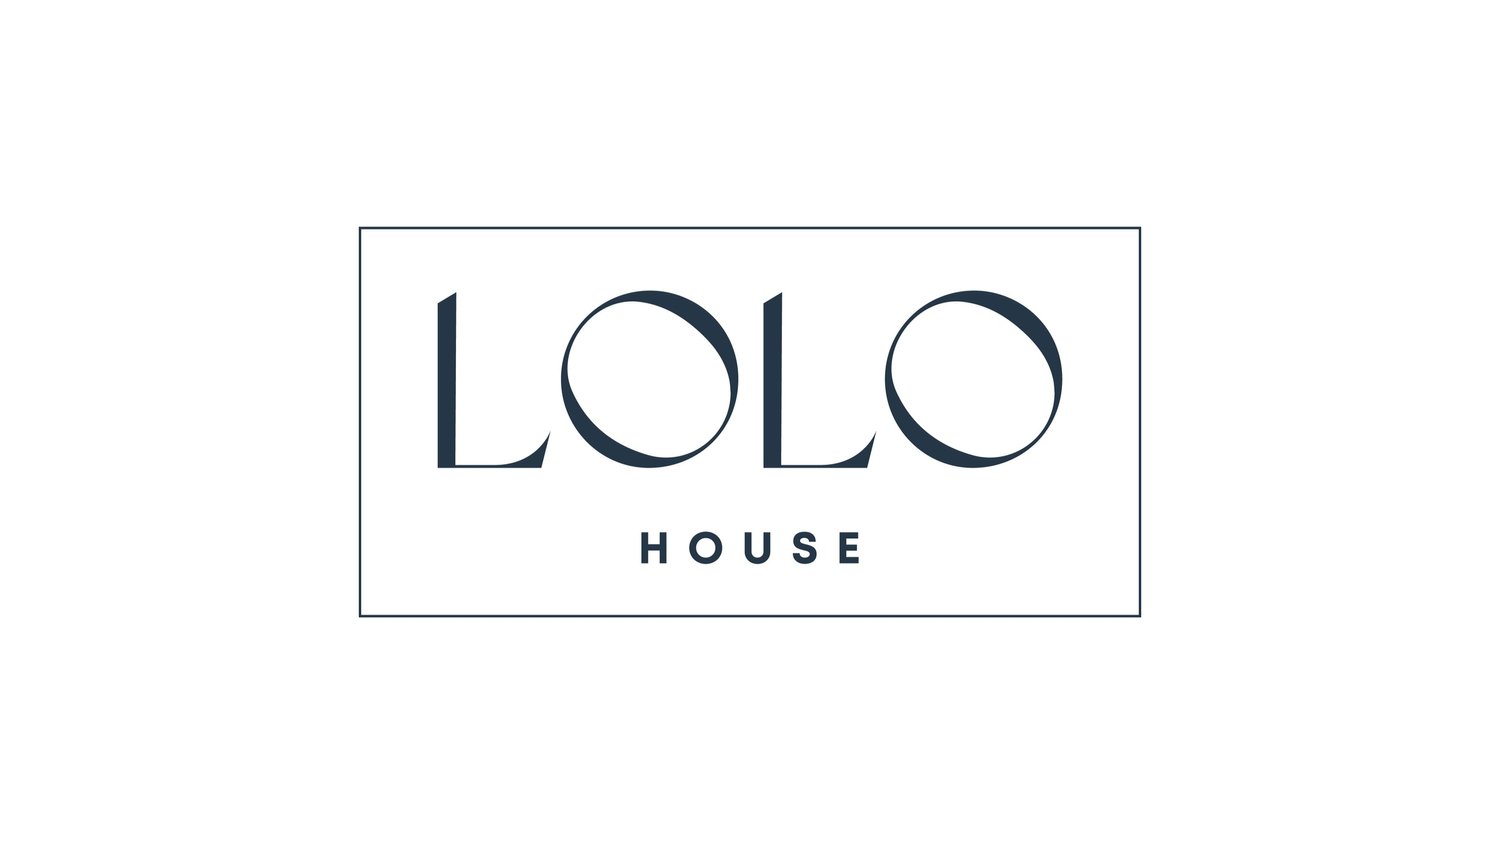 The LoLo House